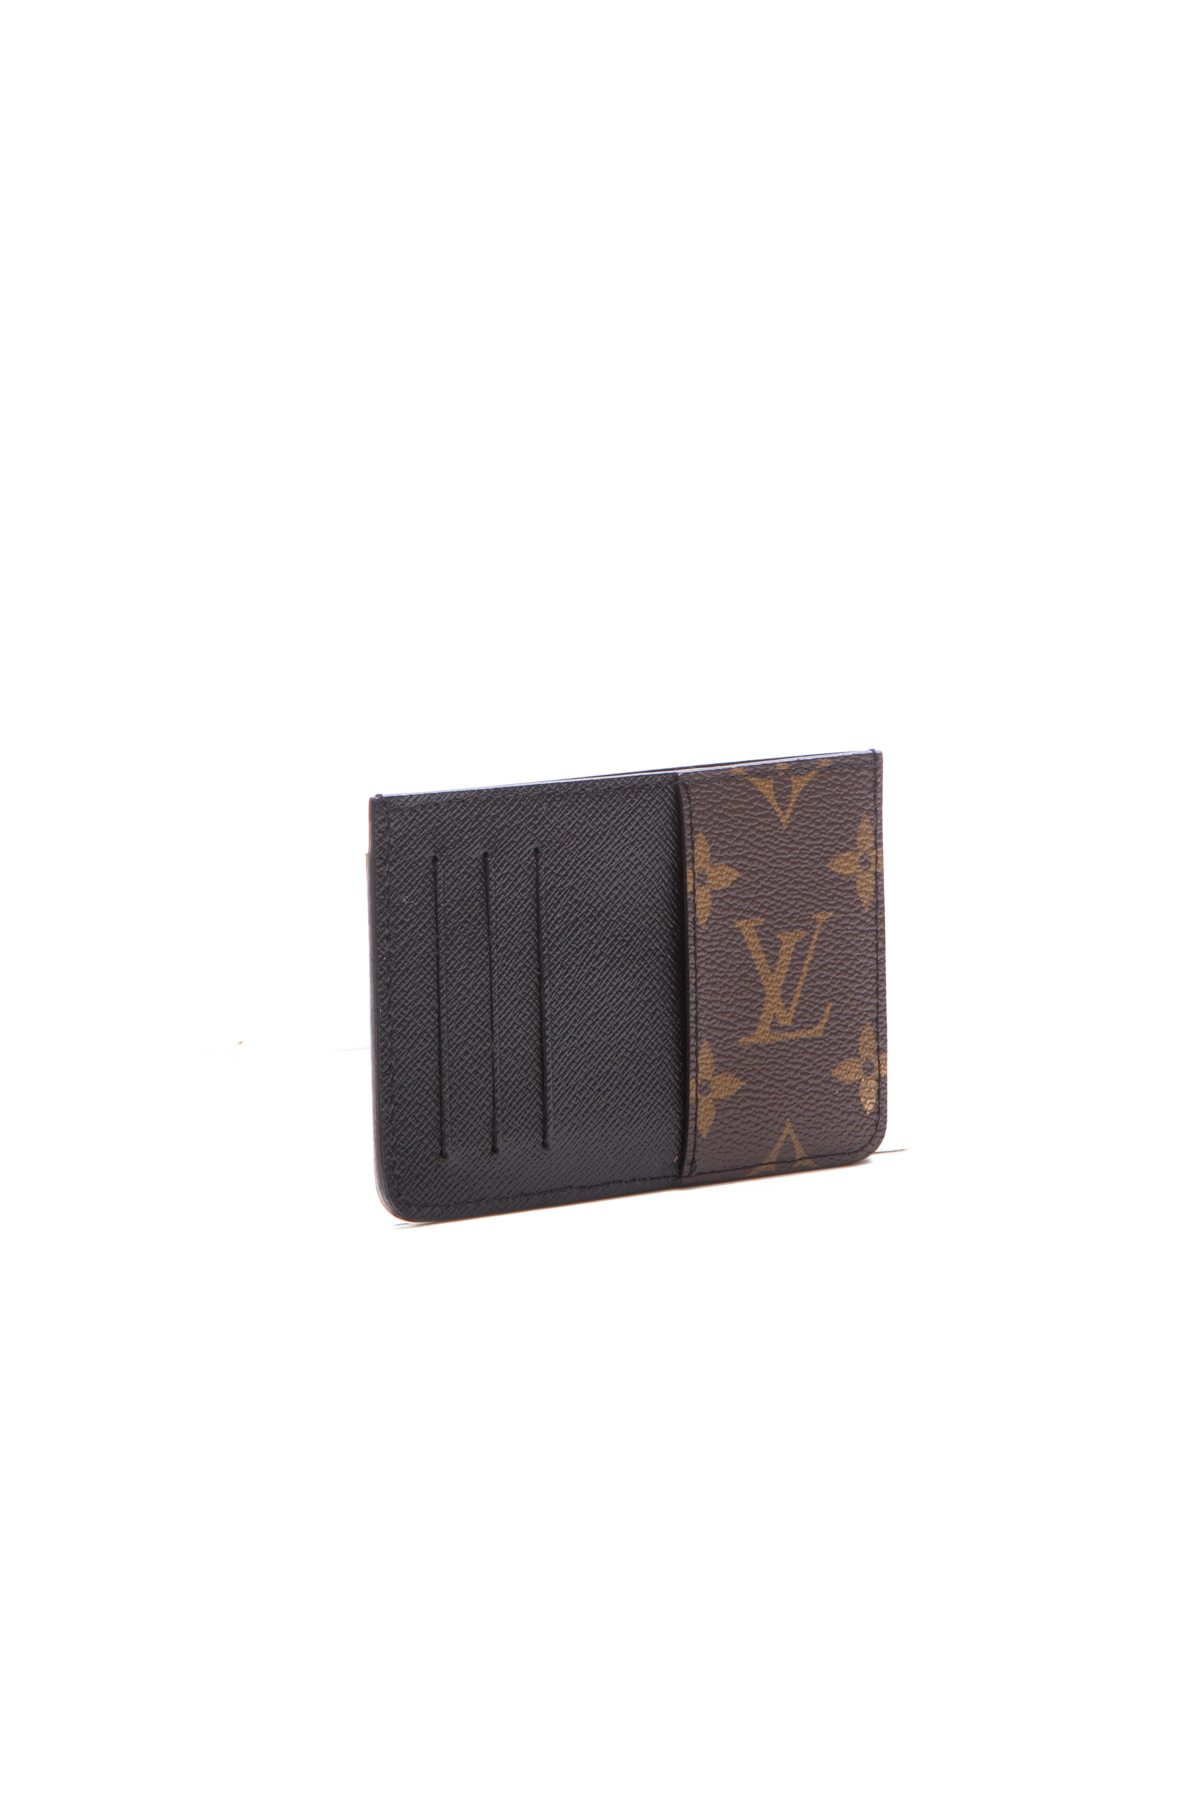 LOUIS VUITTON NEO PORTE CARTES [ MENS WALLET ] [ REVIEW ] [WHAT FITS IN ] 